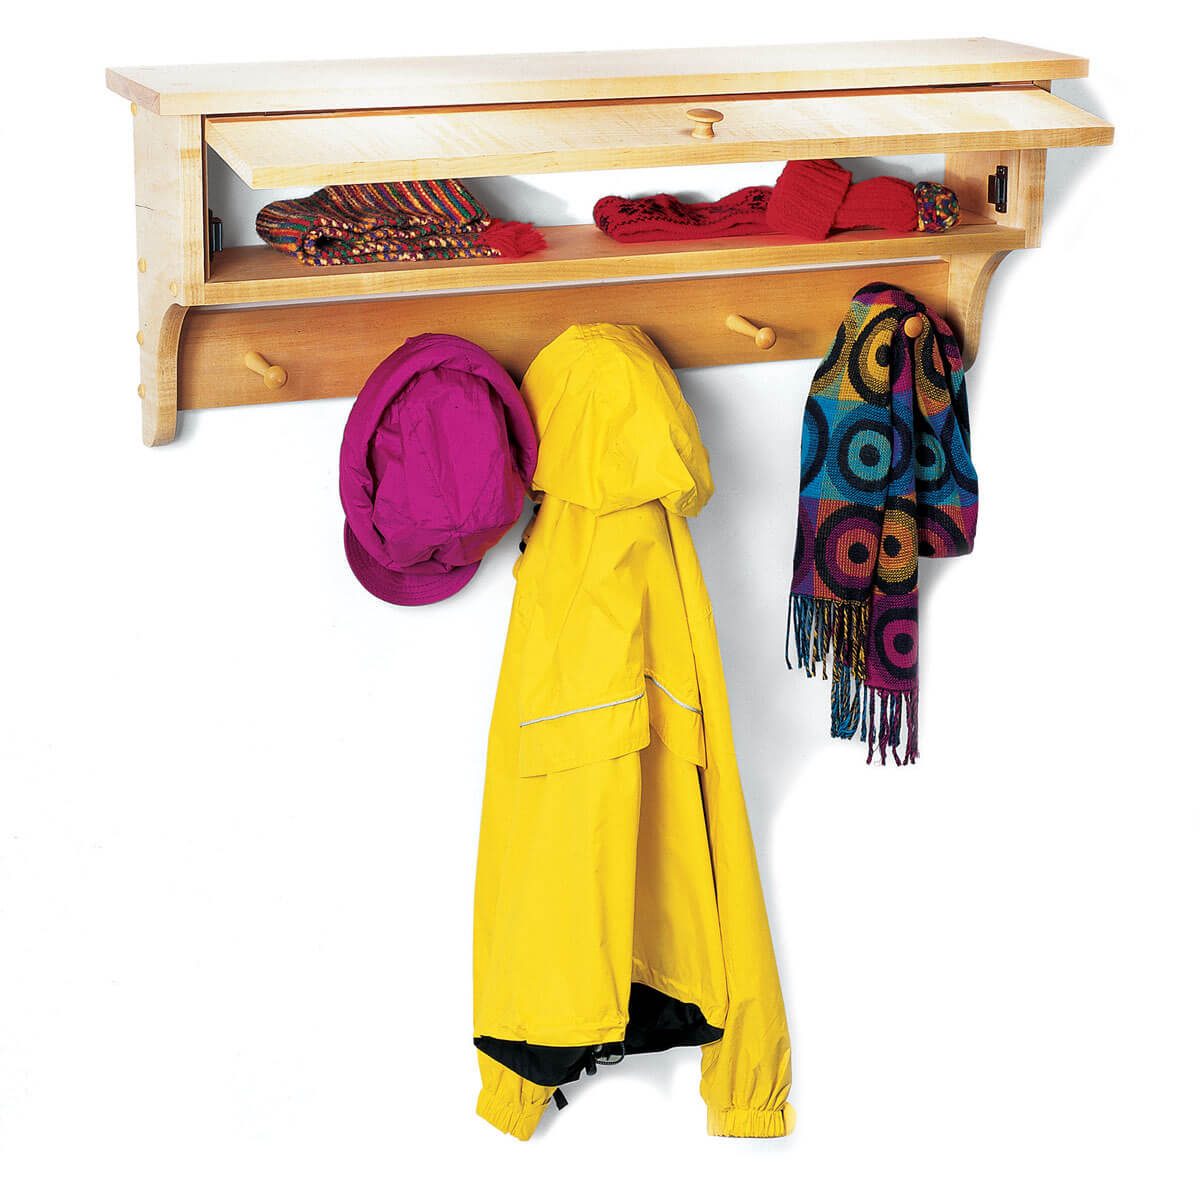 Make This Coat and Mitten Rack